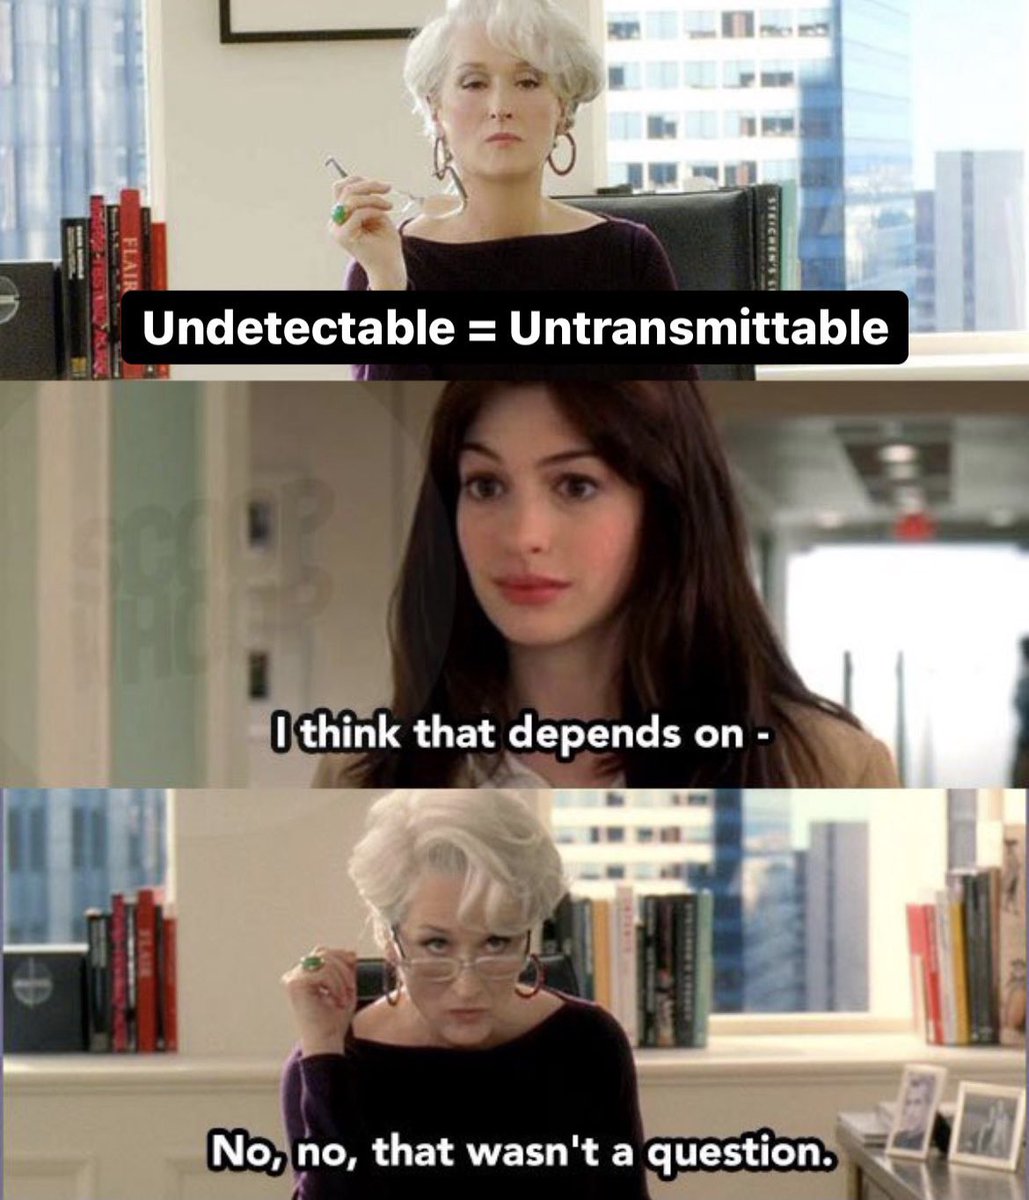 Undetectable = Untransmittable

U = U

Can’t pass it on

👏👏👏👏👏👏👏👏